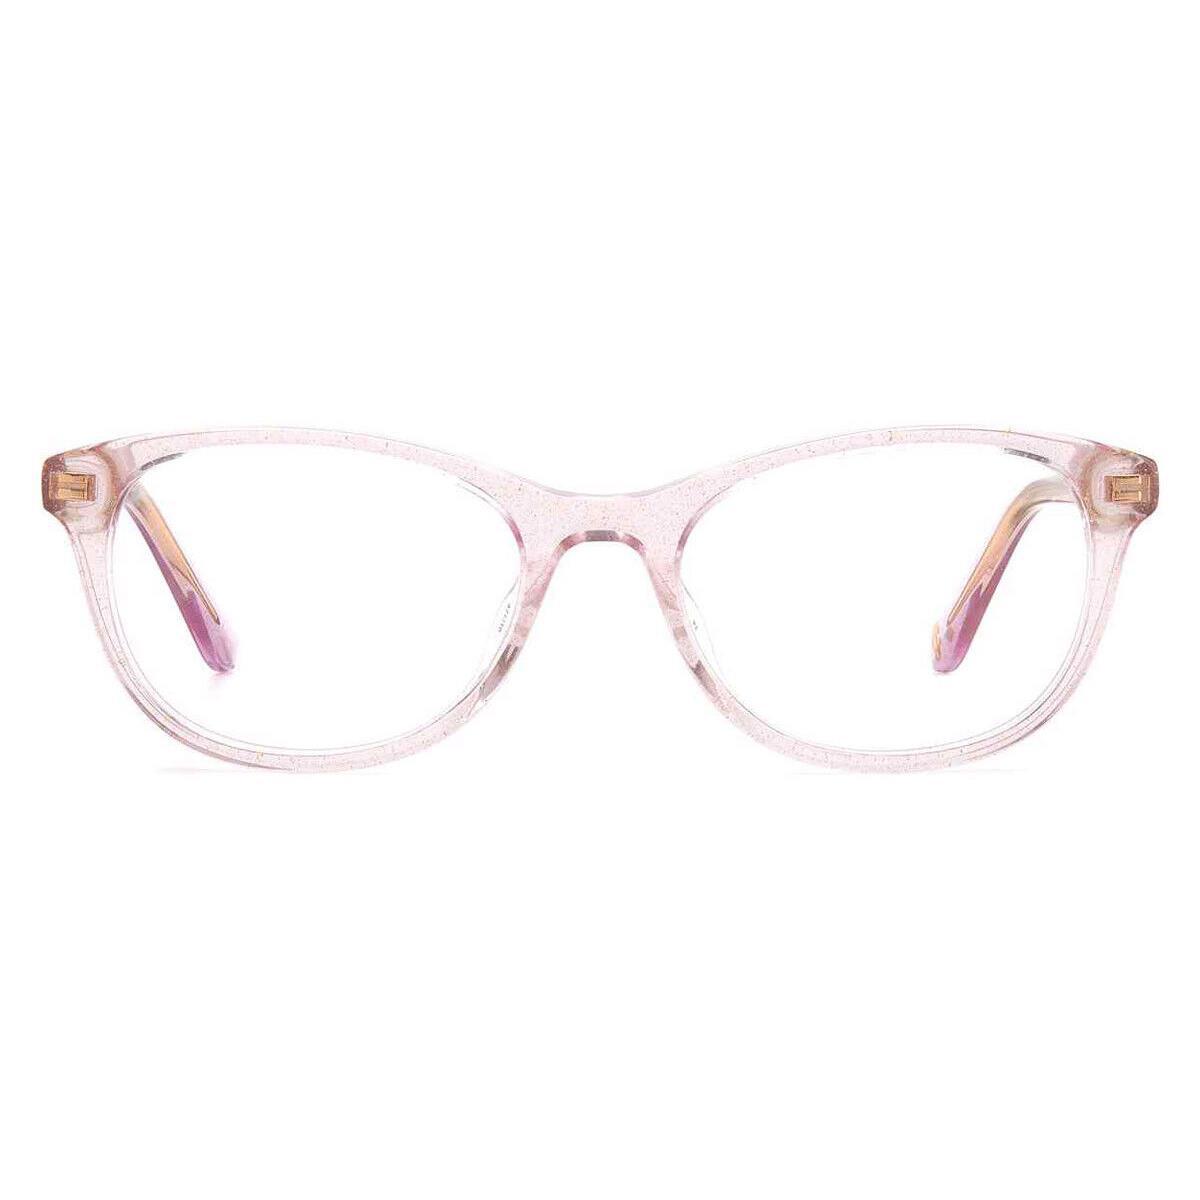 Juicy Couture 950 Eyeglasses Kids Pink Glitter Oval 45mm